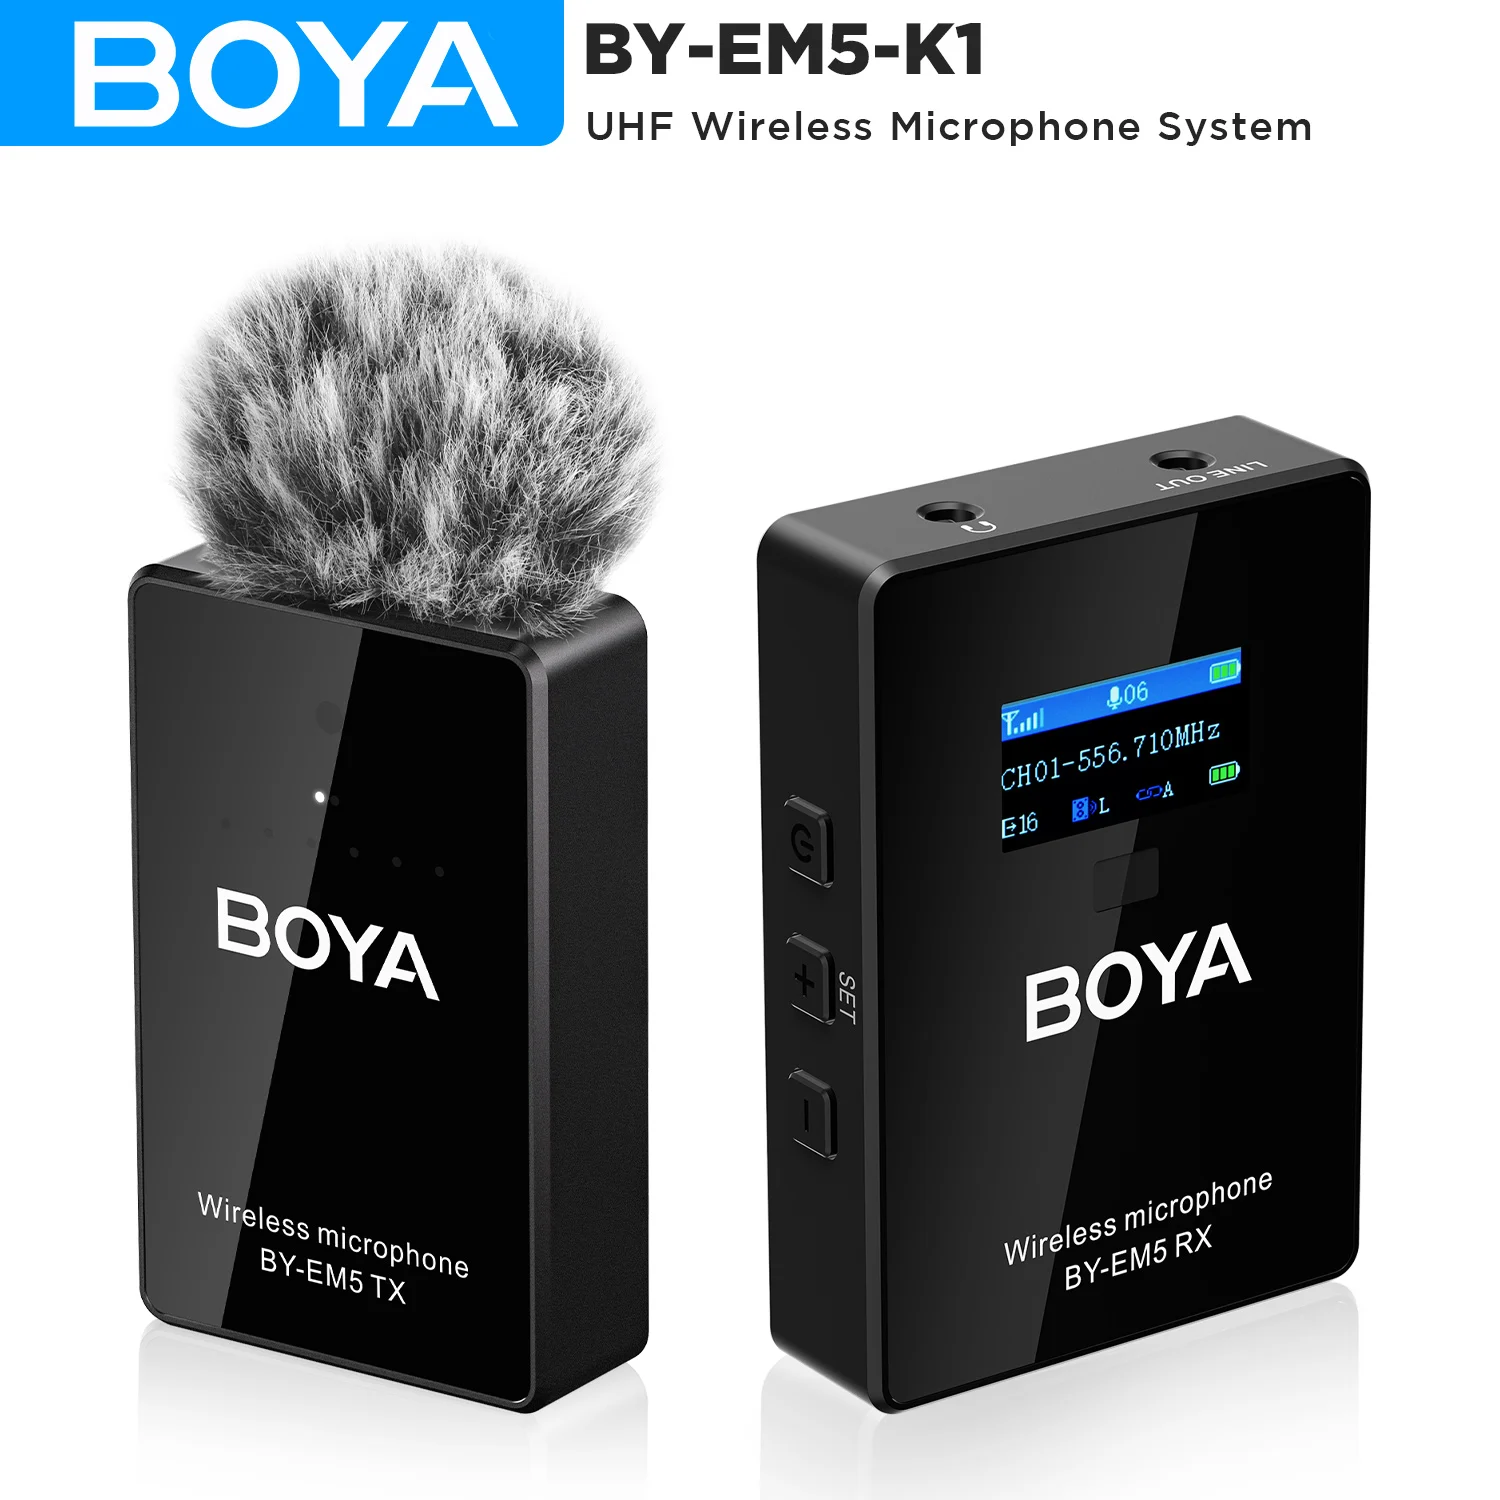 

BOYA BY-EM5-K1 48-Channel UHF Wireless Lavalier Microphone for iPhone Android PC DSLR Cameras Online Teaching Streaming Youtube